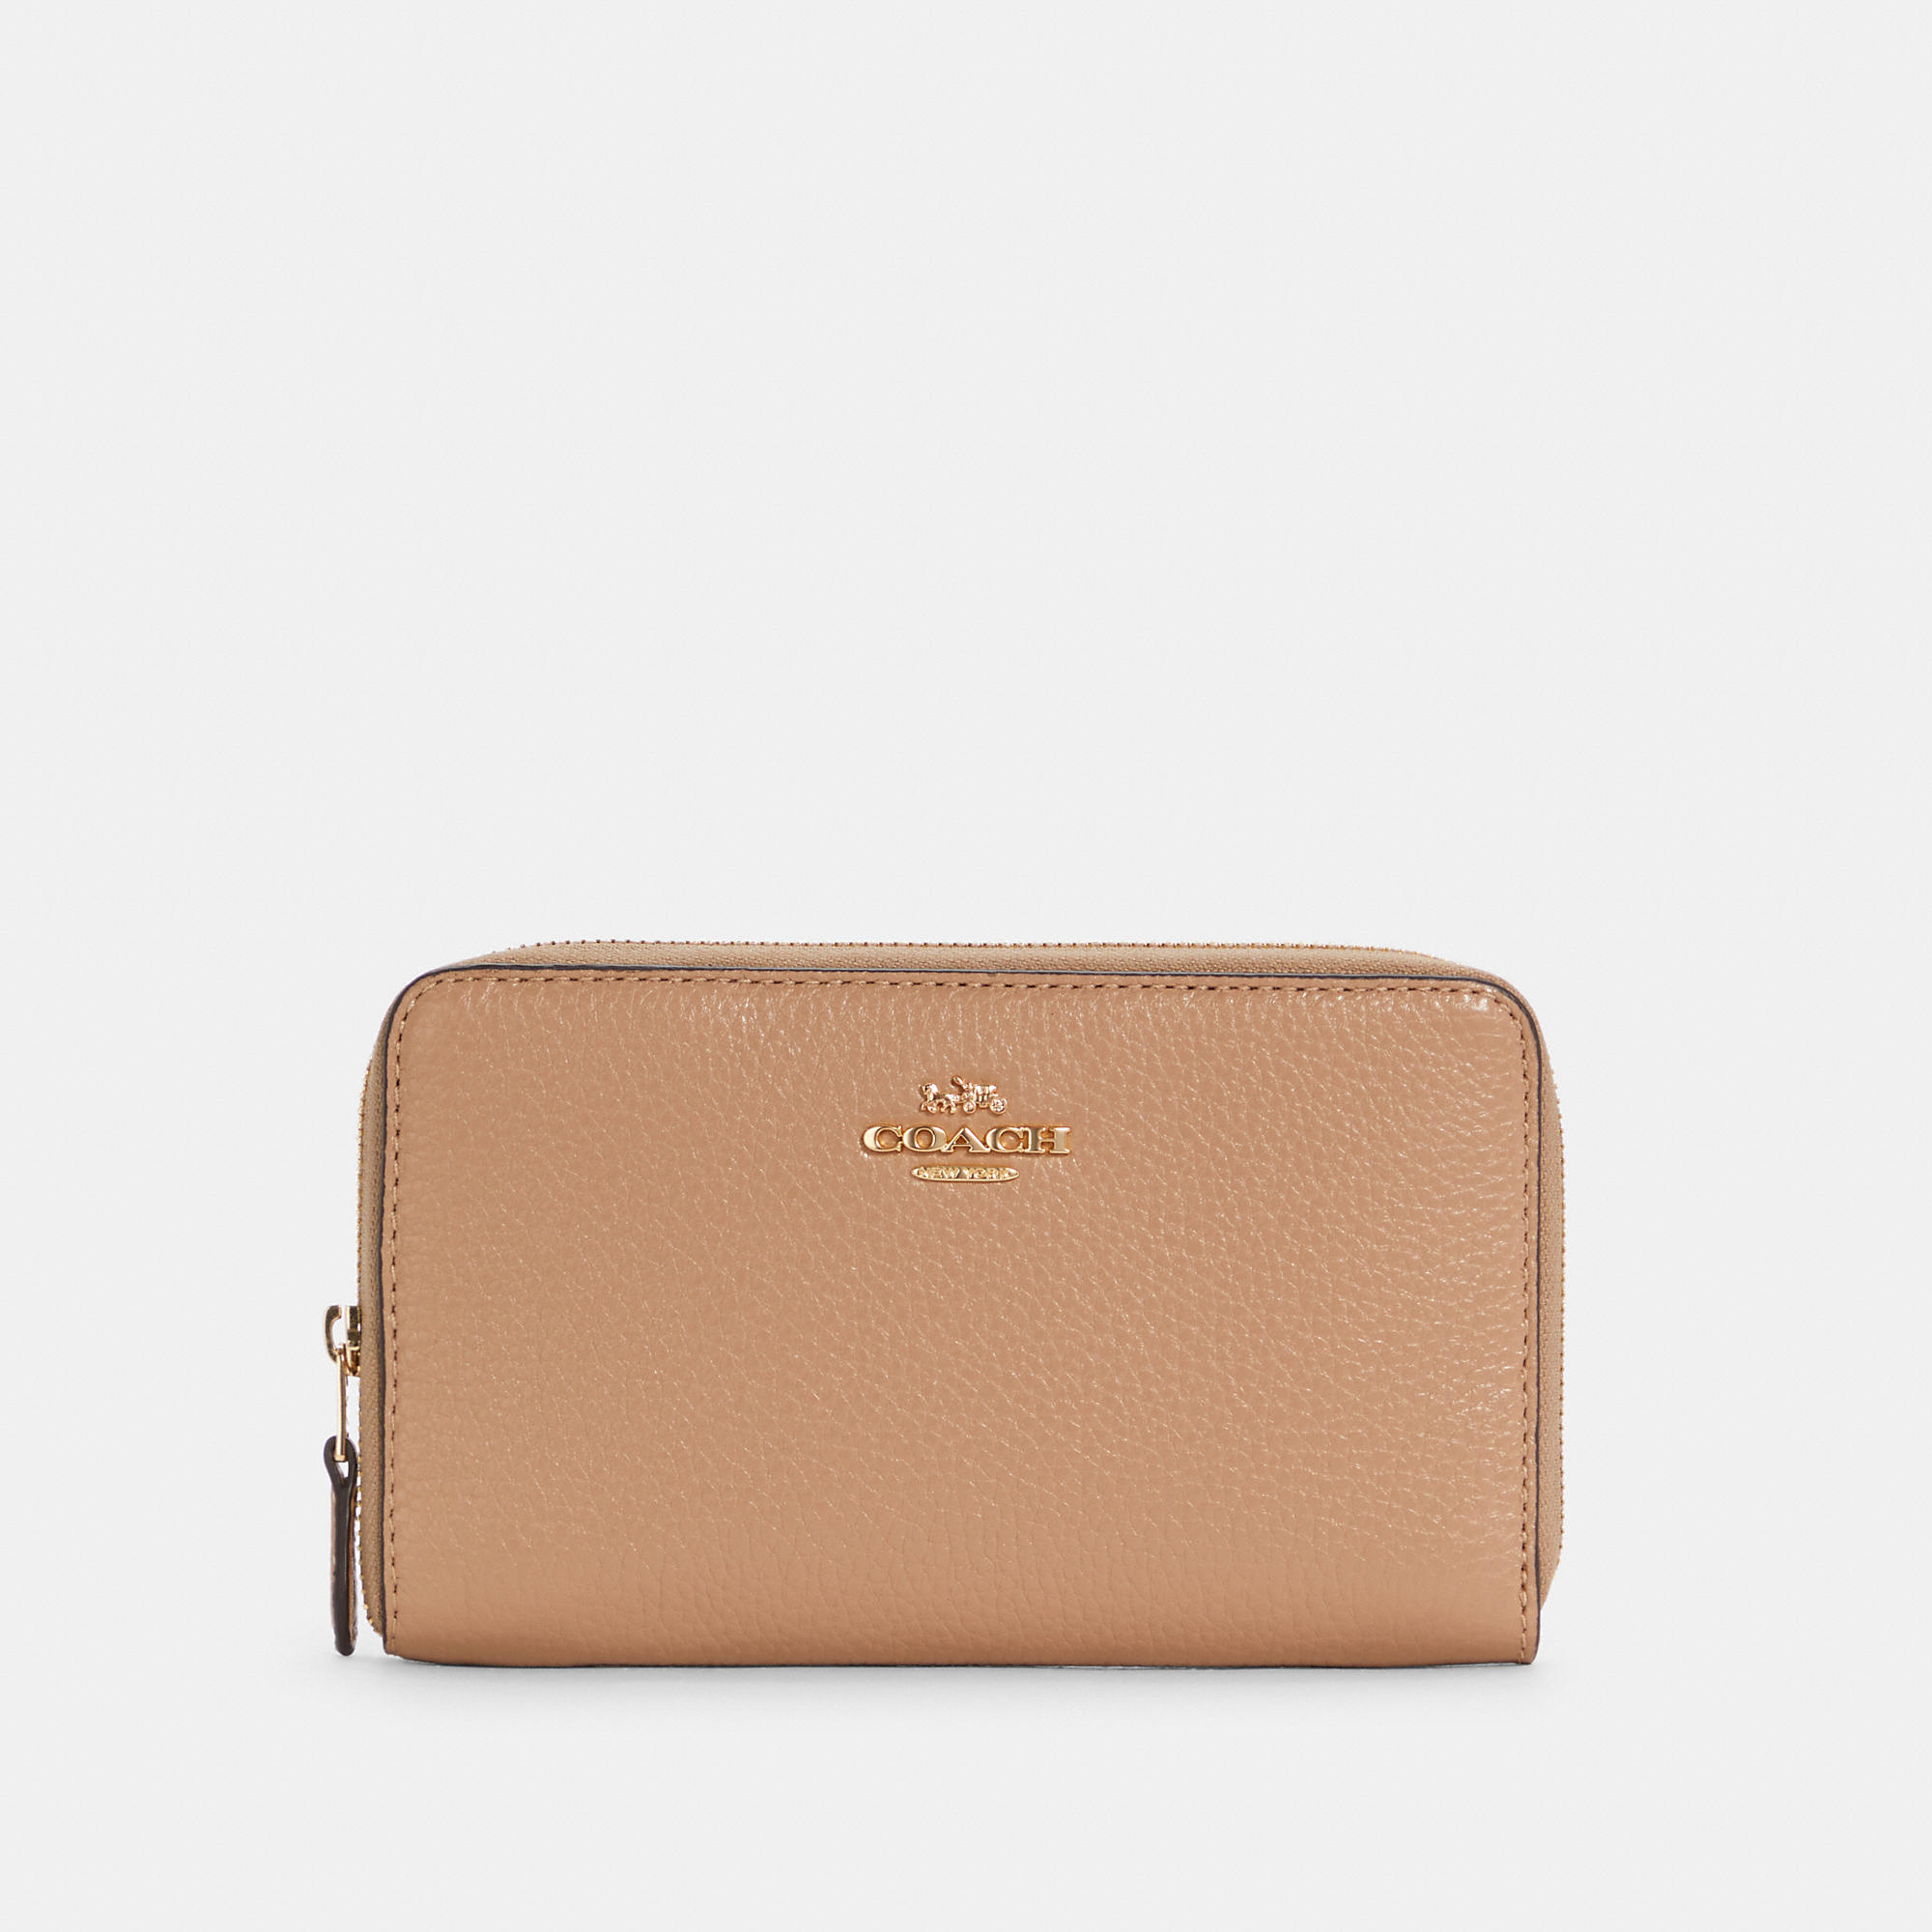 Women's COACH Wallets On Sale, Up To 70% Off | ModeSens